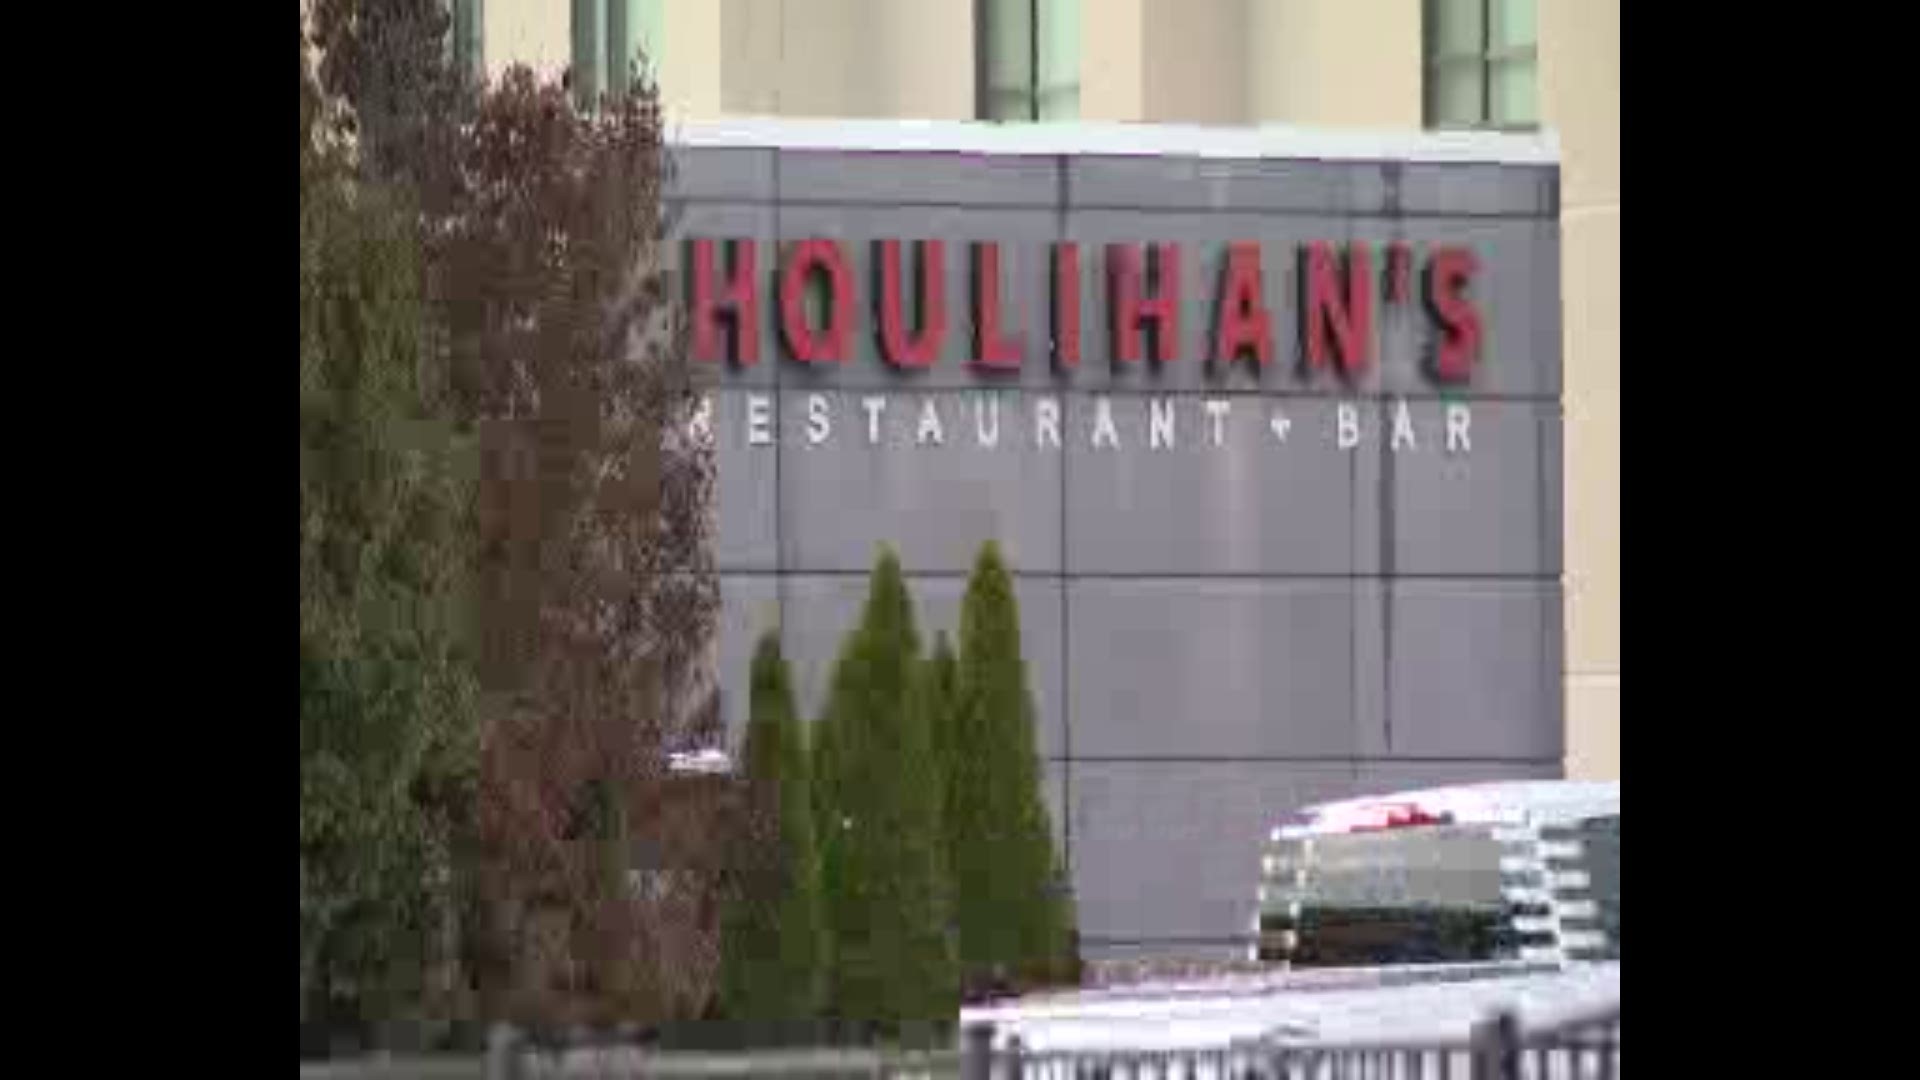 Houlihan's announced it closed its Brentwood location on Nov. 11.